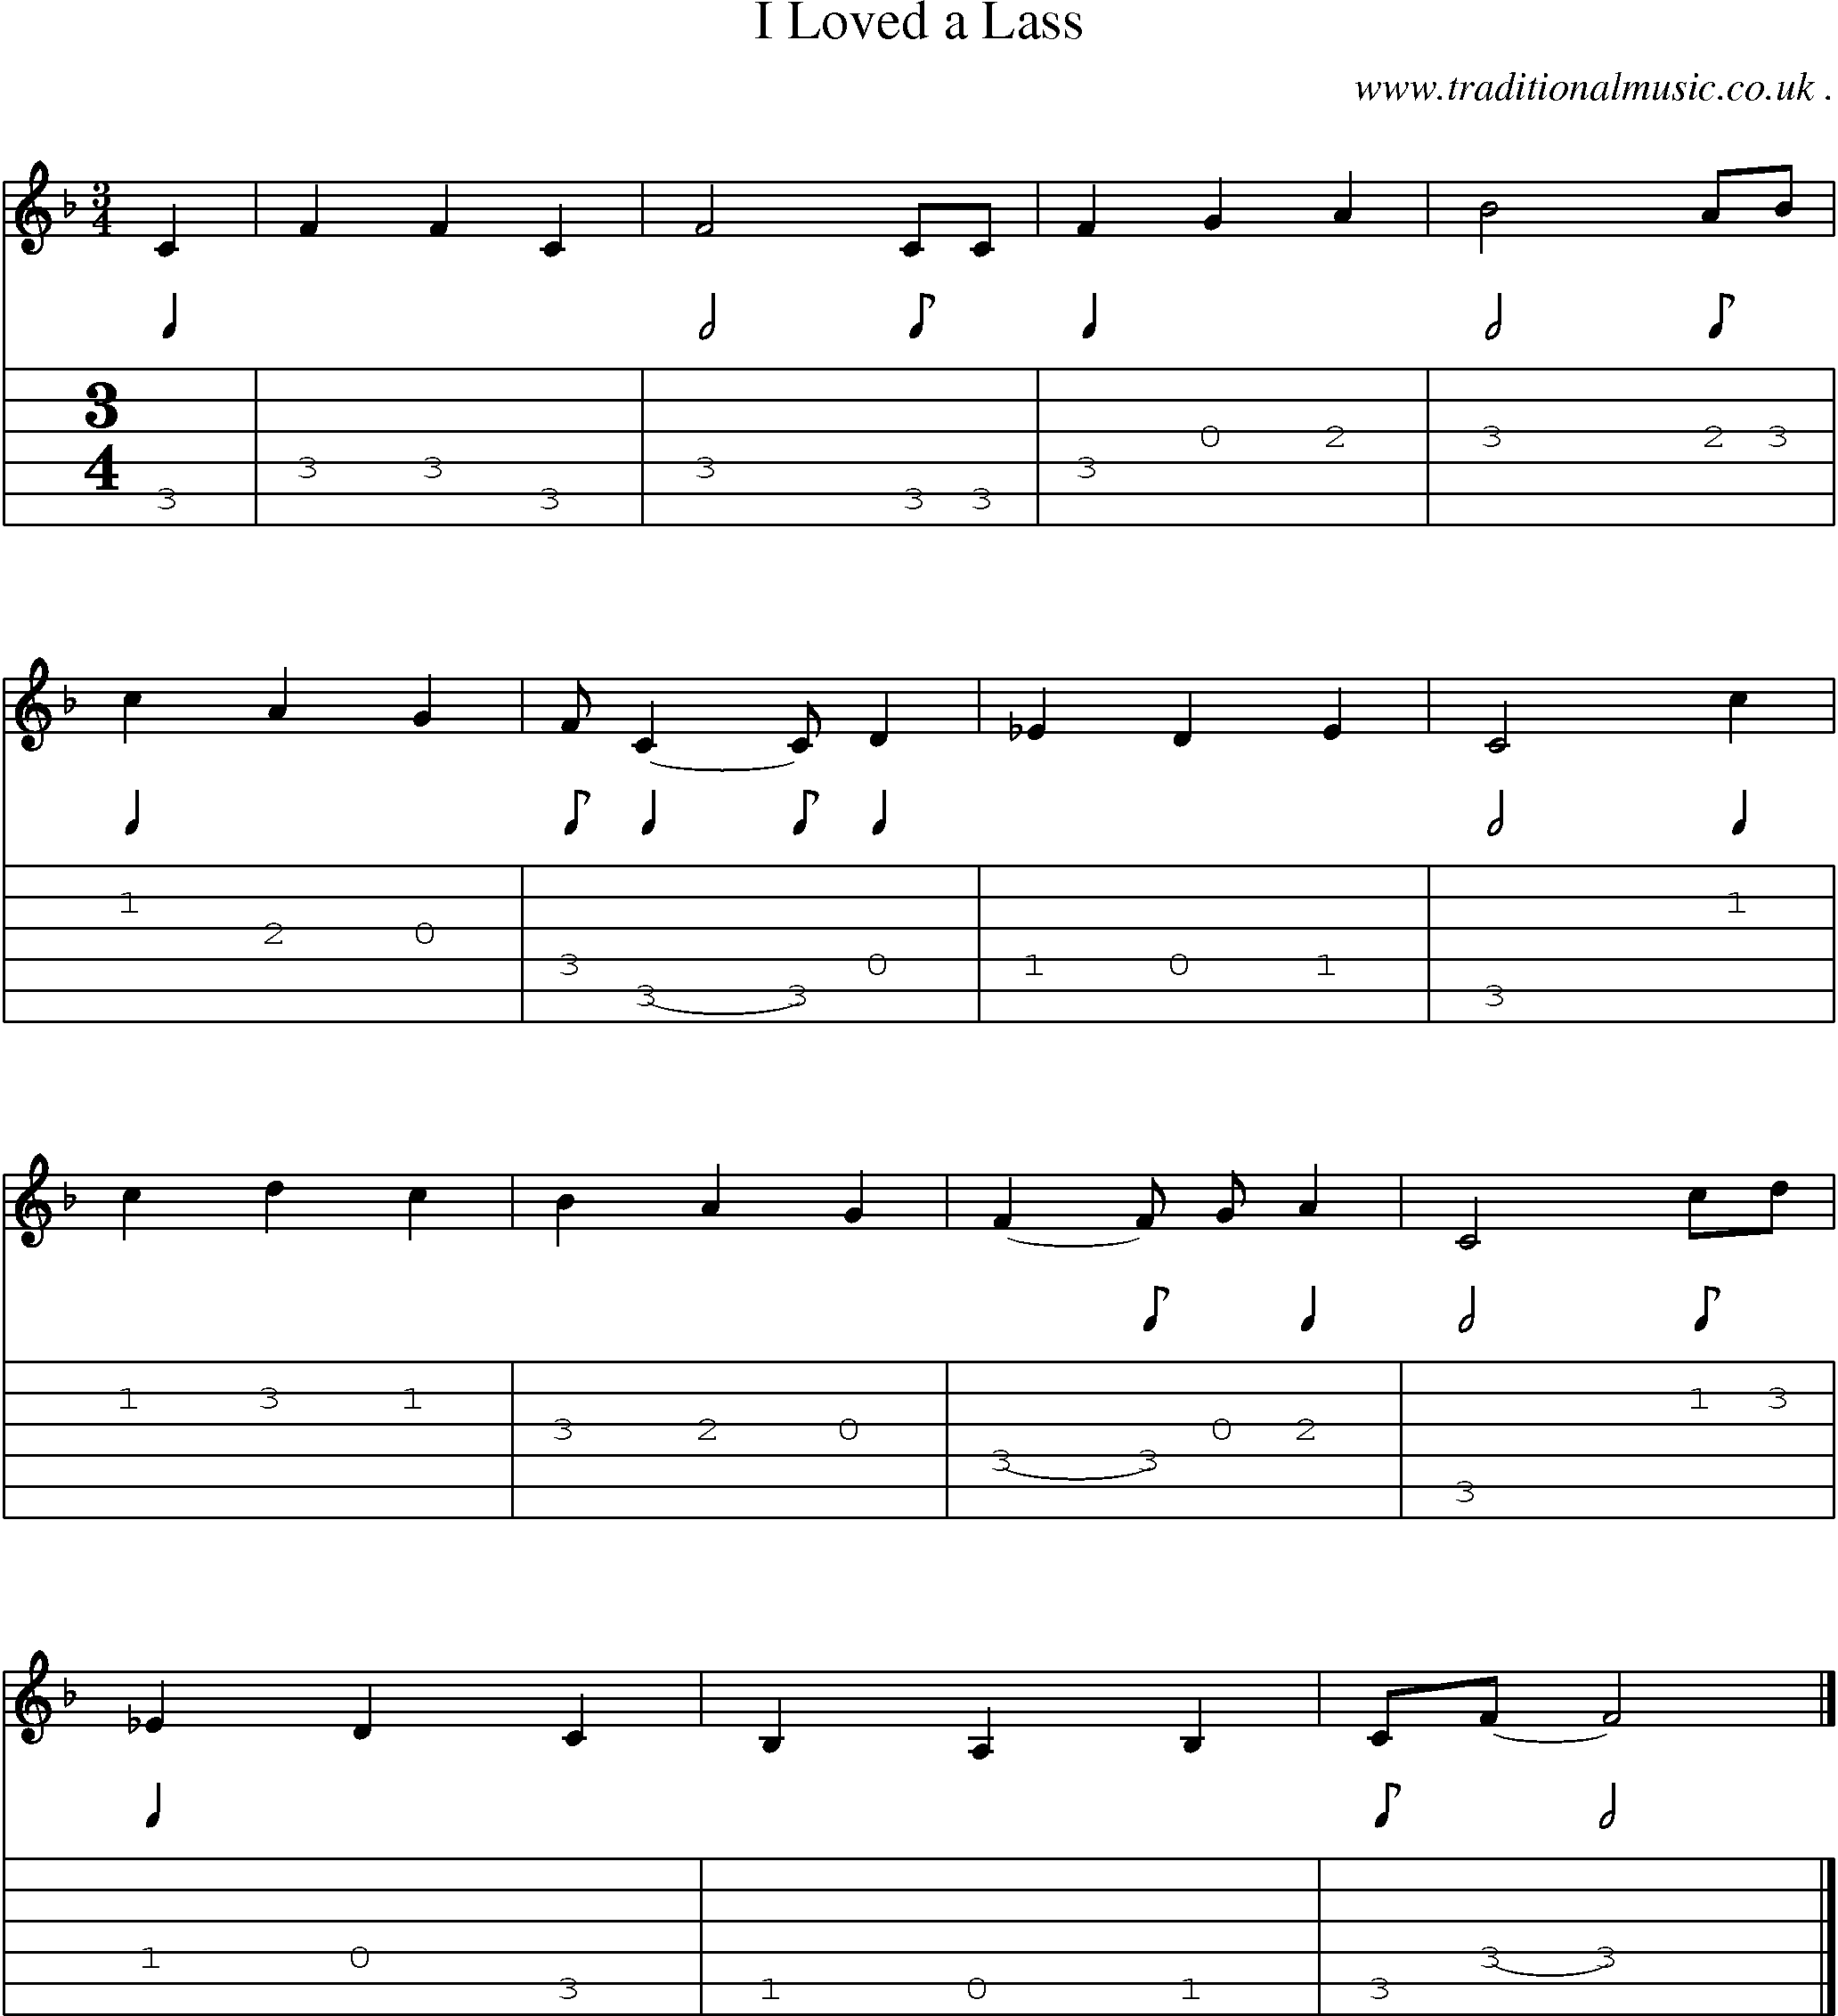 Sheet-music  score, Chords and Guitar Tabs for I Loved A Lass